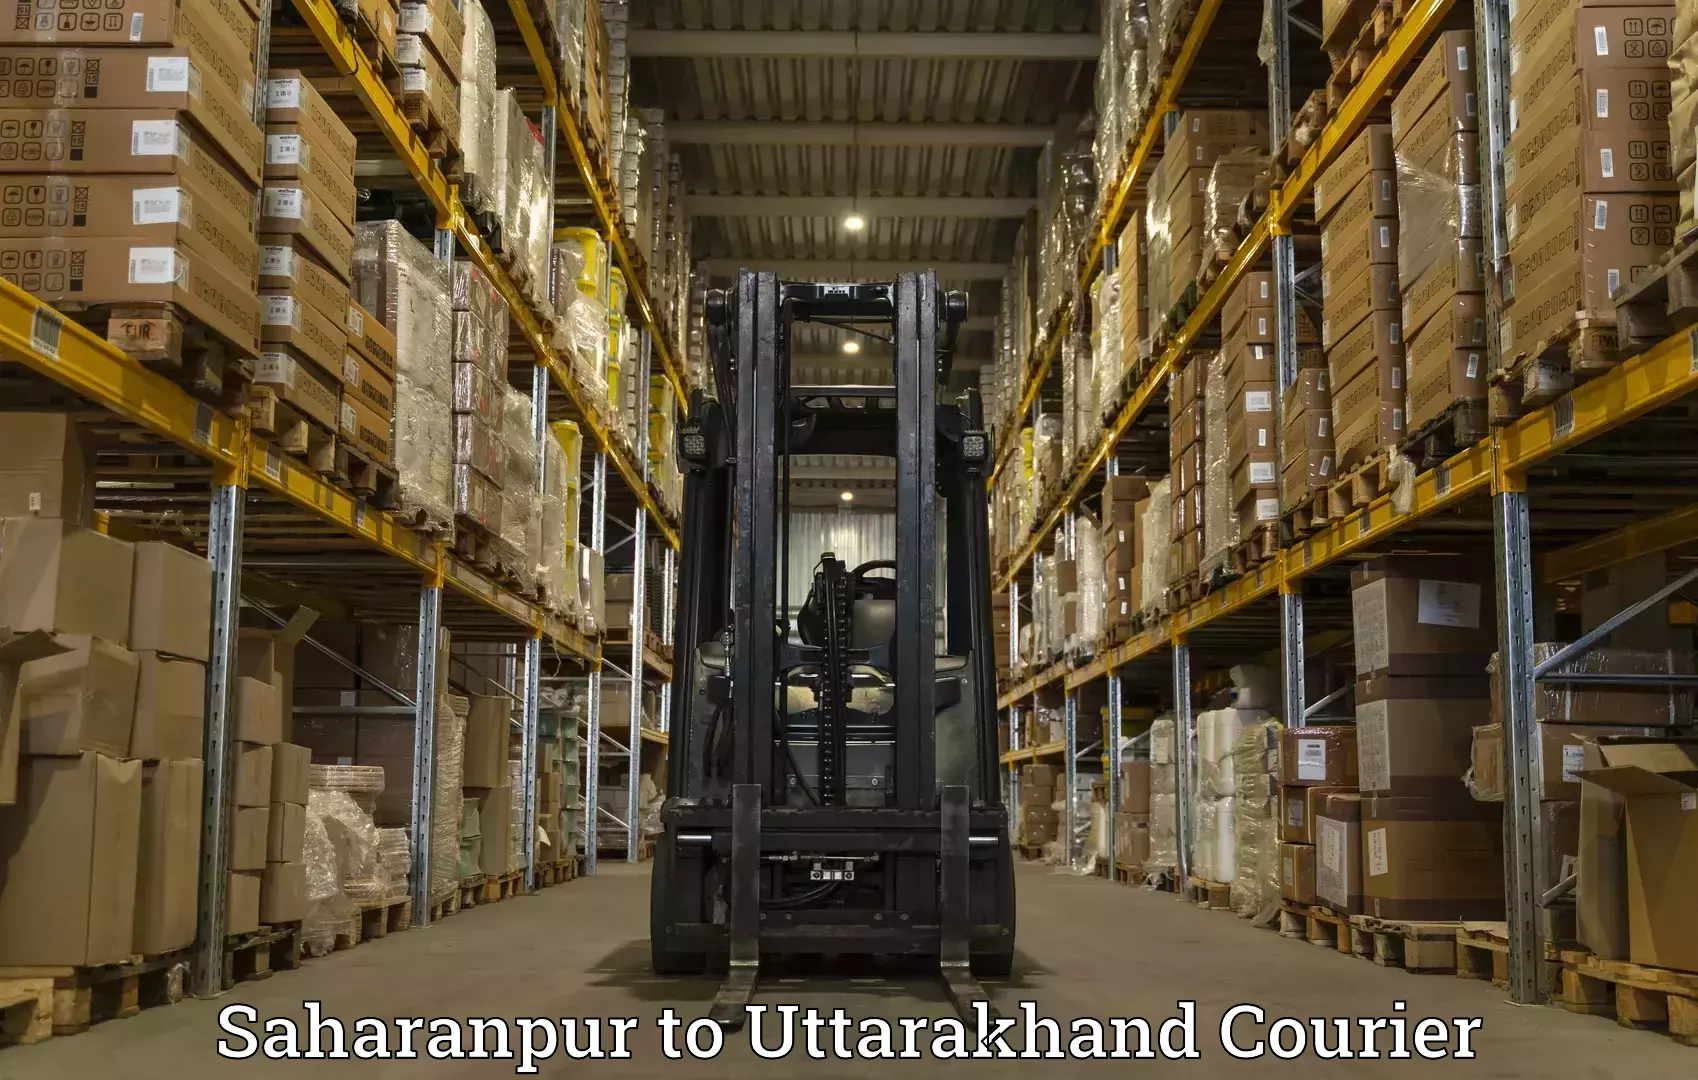 Multi-national courier services Saharanpur to Bageshwar